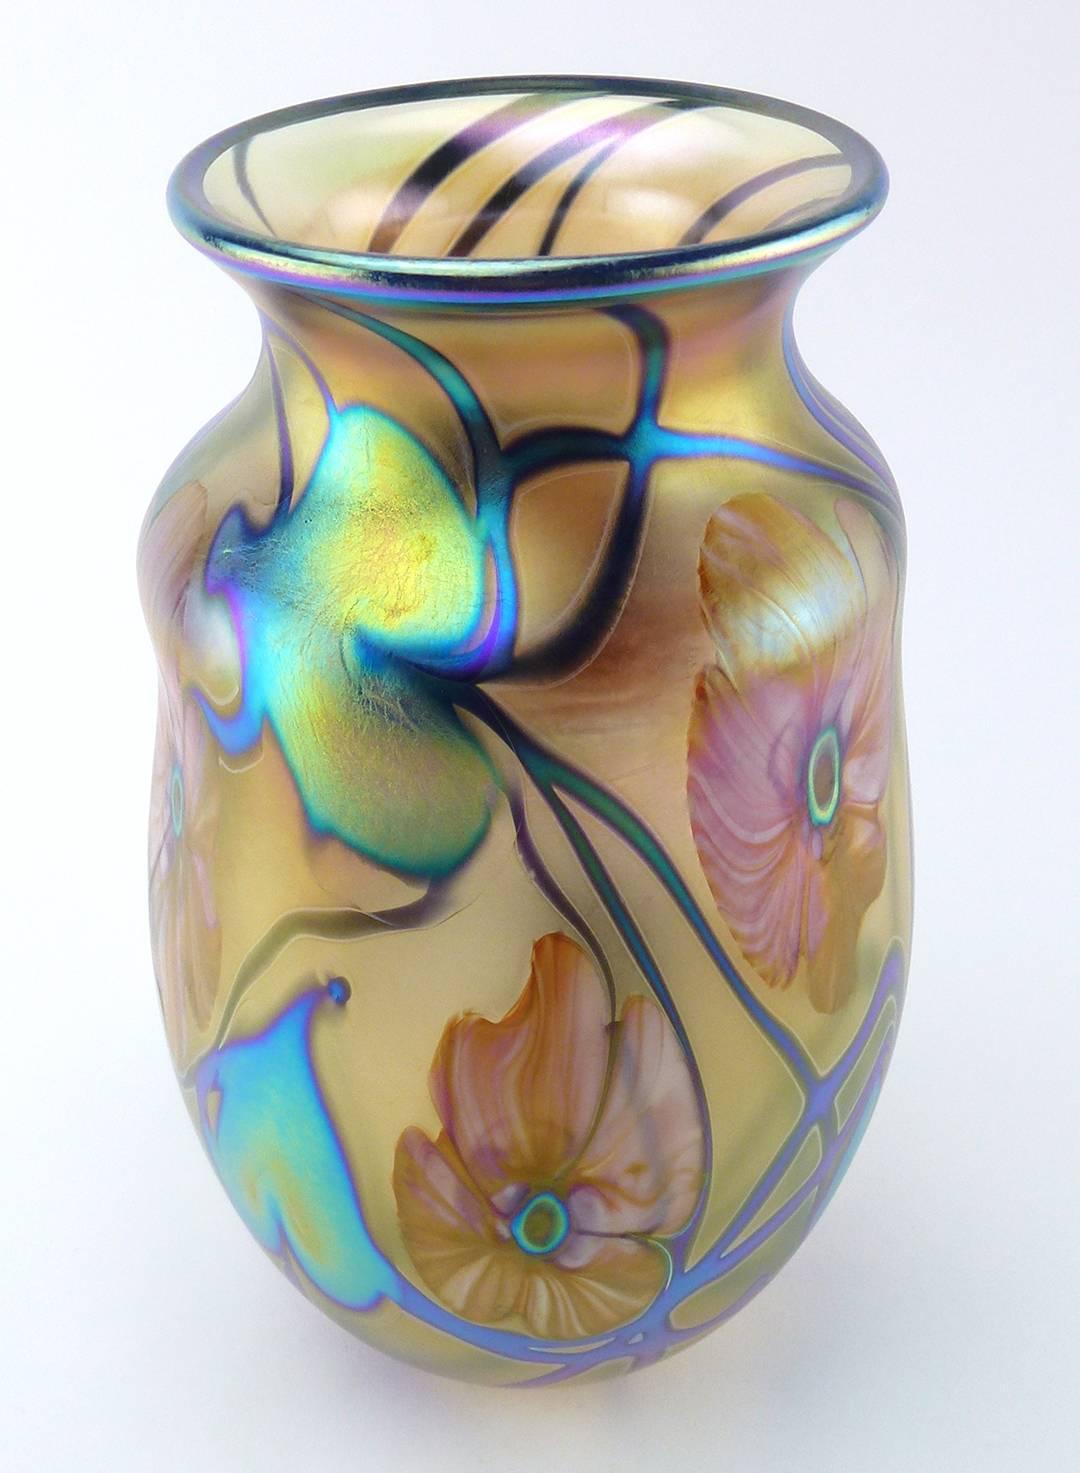 Charles Lotton (B. 1935) Studio art glass vase multi flora gold iridescent design, 2002, the everted mouth over the waisted neck, the cylindrical body with ovate base, with pink flowerheads on green-blue iridescent vines.

Signed Charles Lotton.